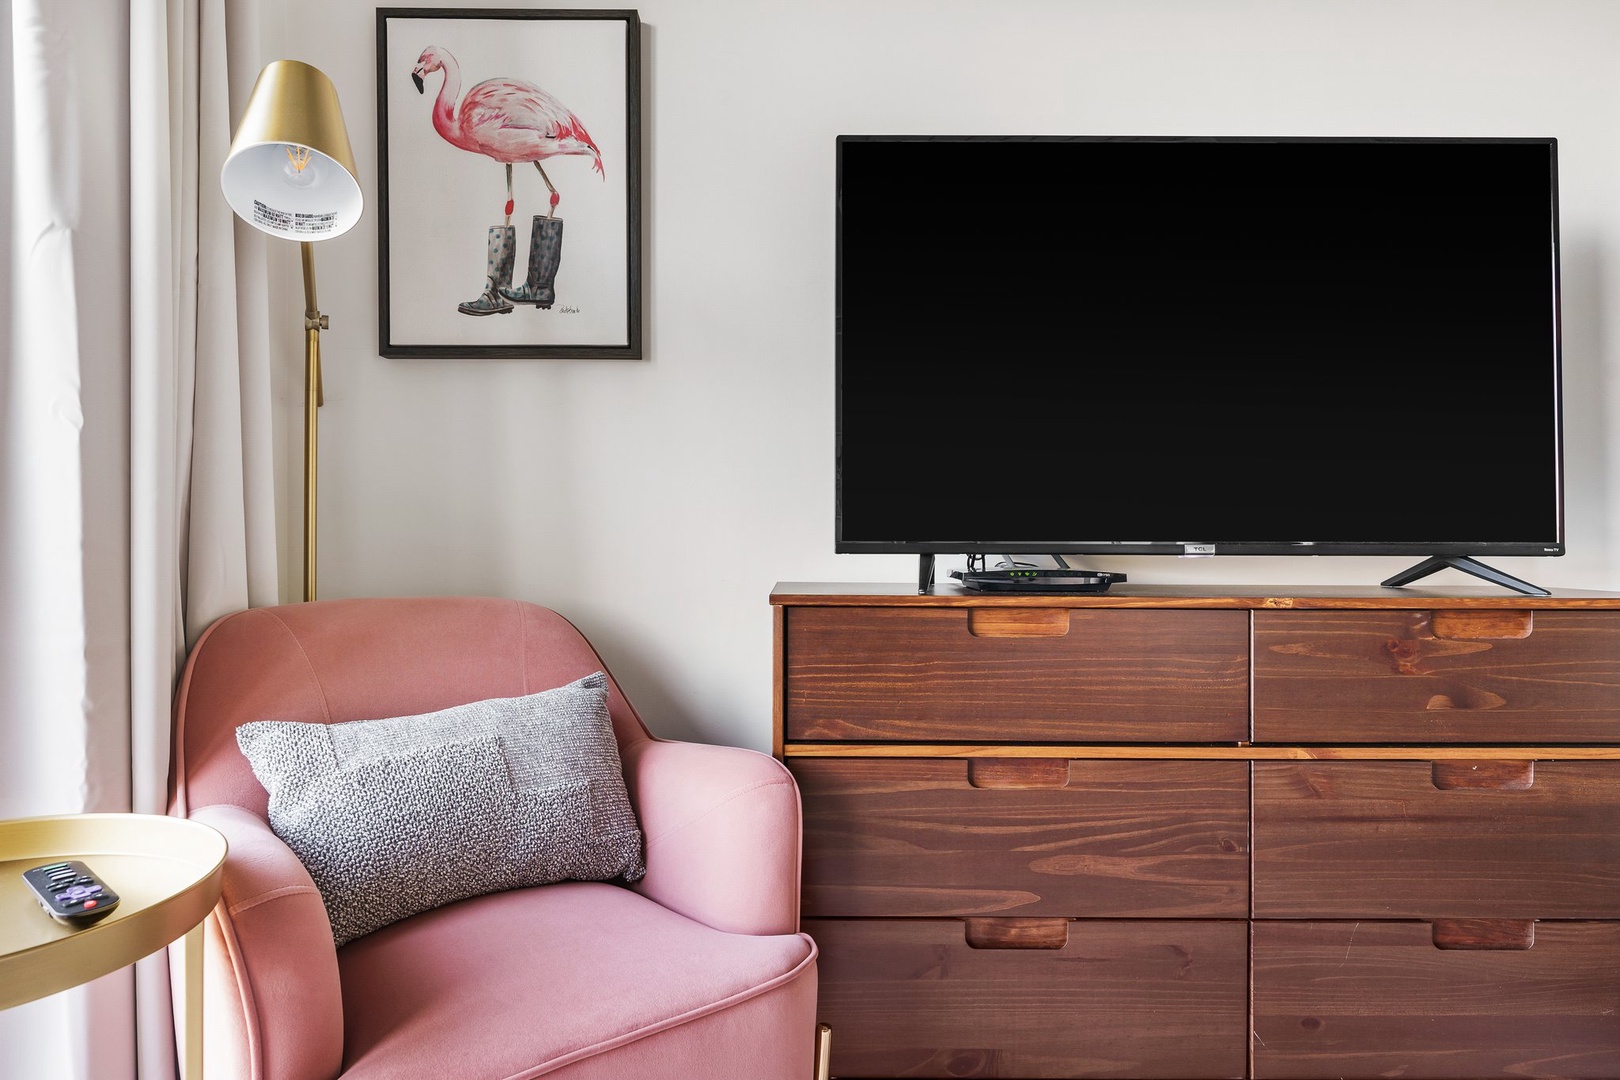 Tune in to your favorite shows with the smart TV and sound system for streaming.